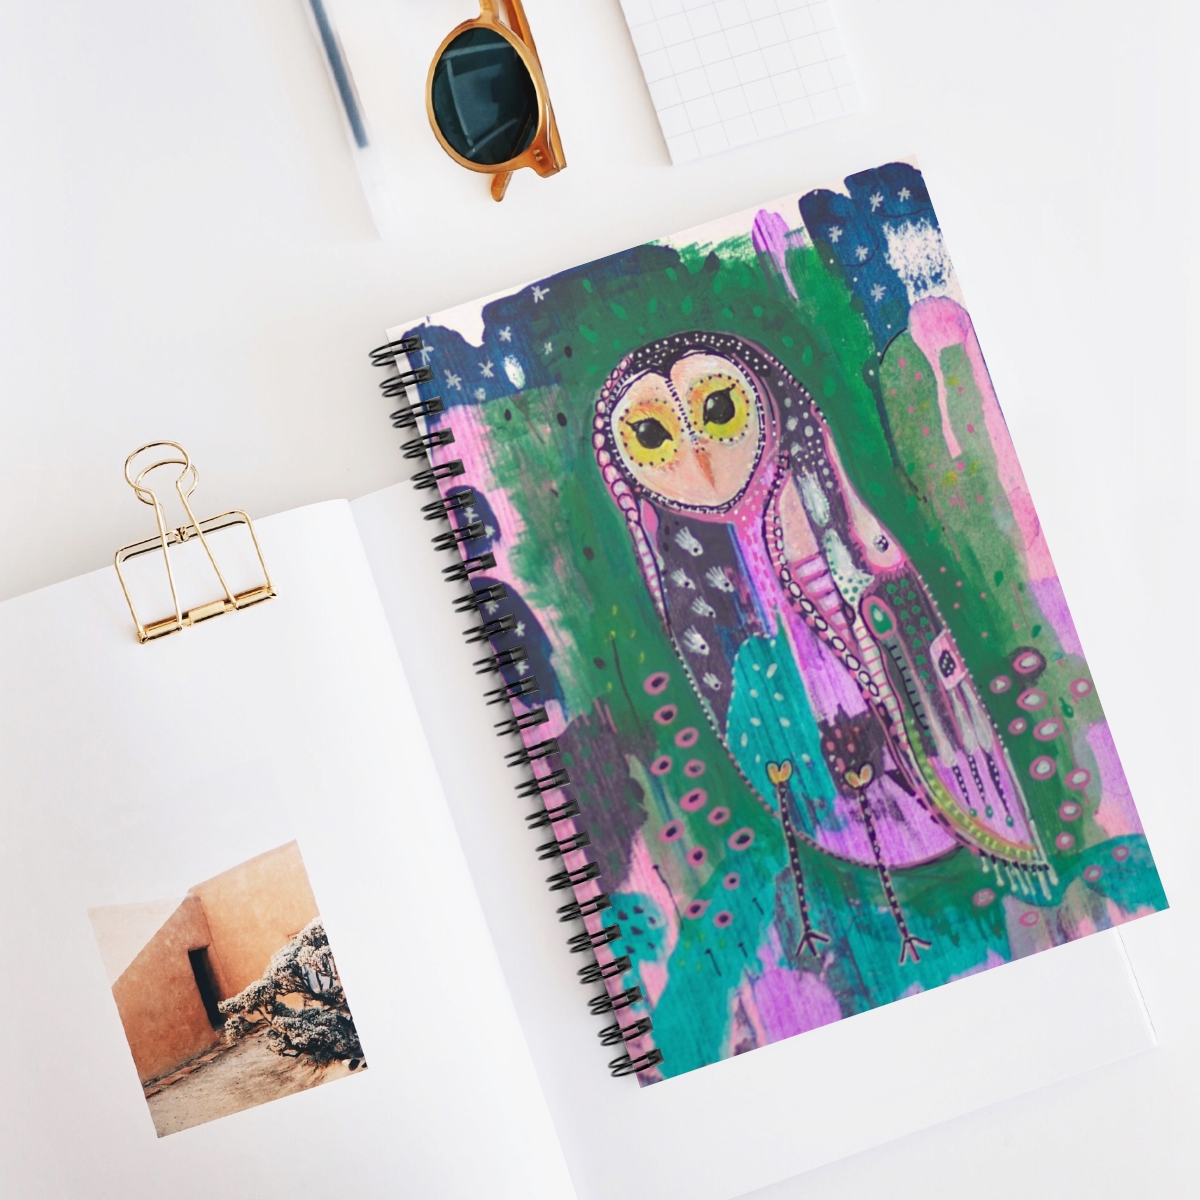 Beautiful Owl journal in context - Owl Spirit guide is a colourful patchwork, whimsical owl based on the barn owl. She stands against an abstract background of green, pink and blue.